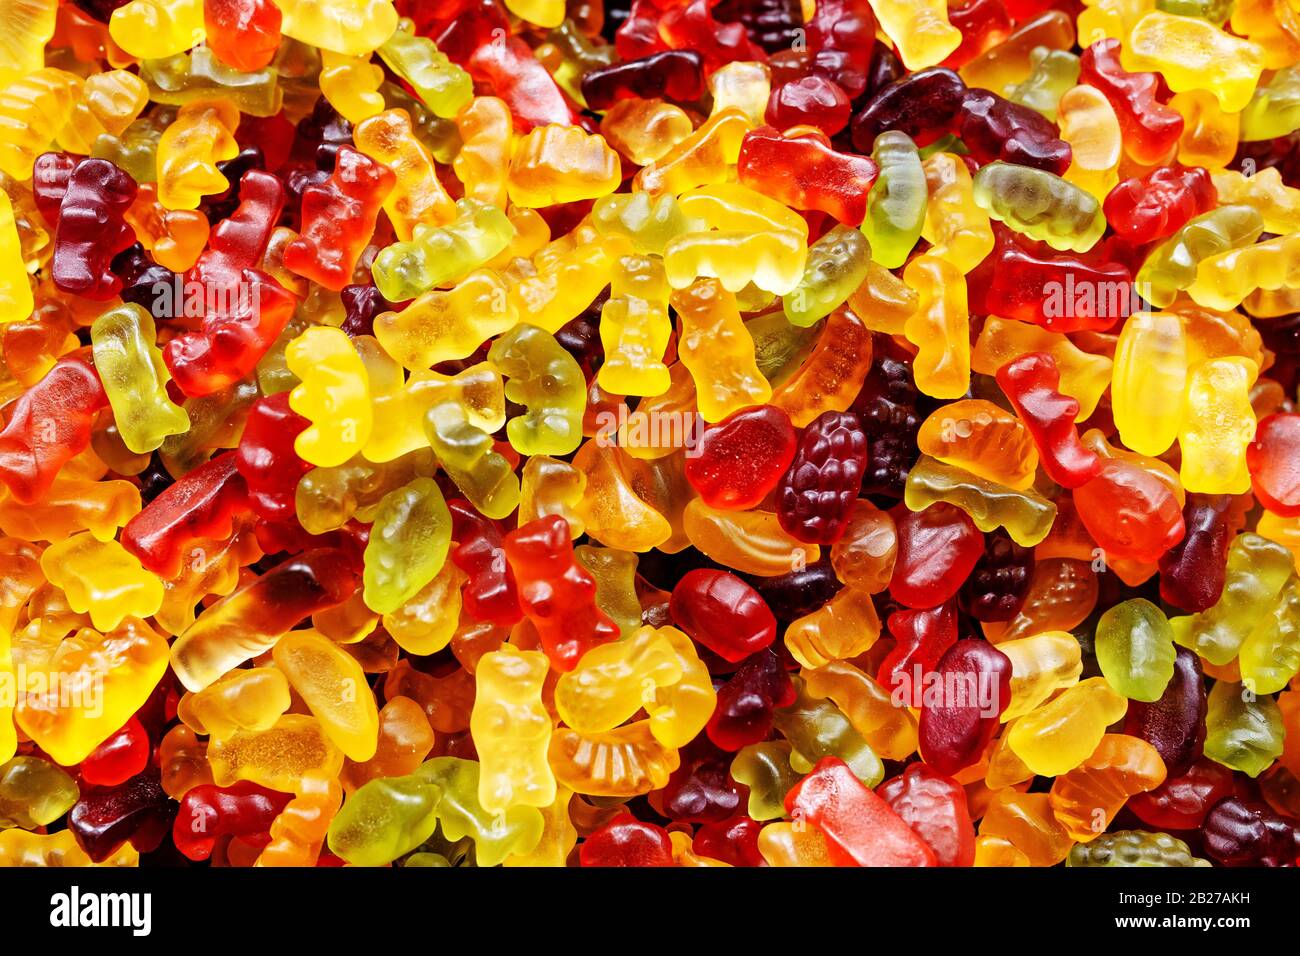 Colorful neon gummy candies, background. Stock Photo